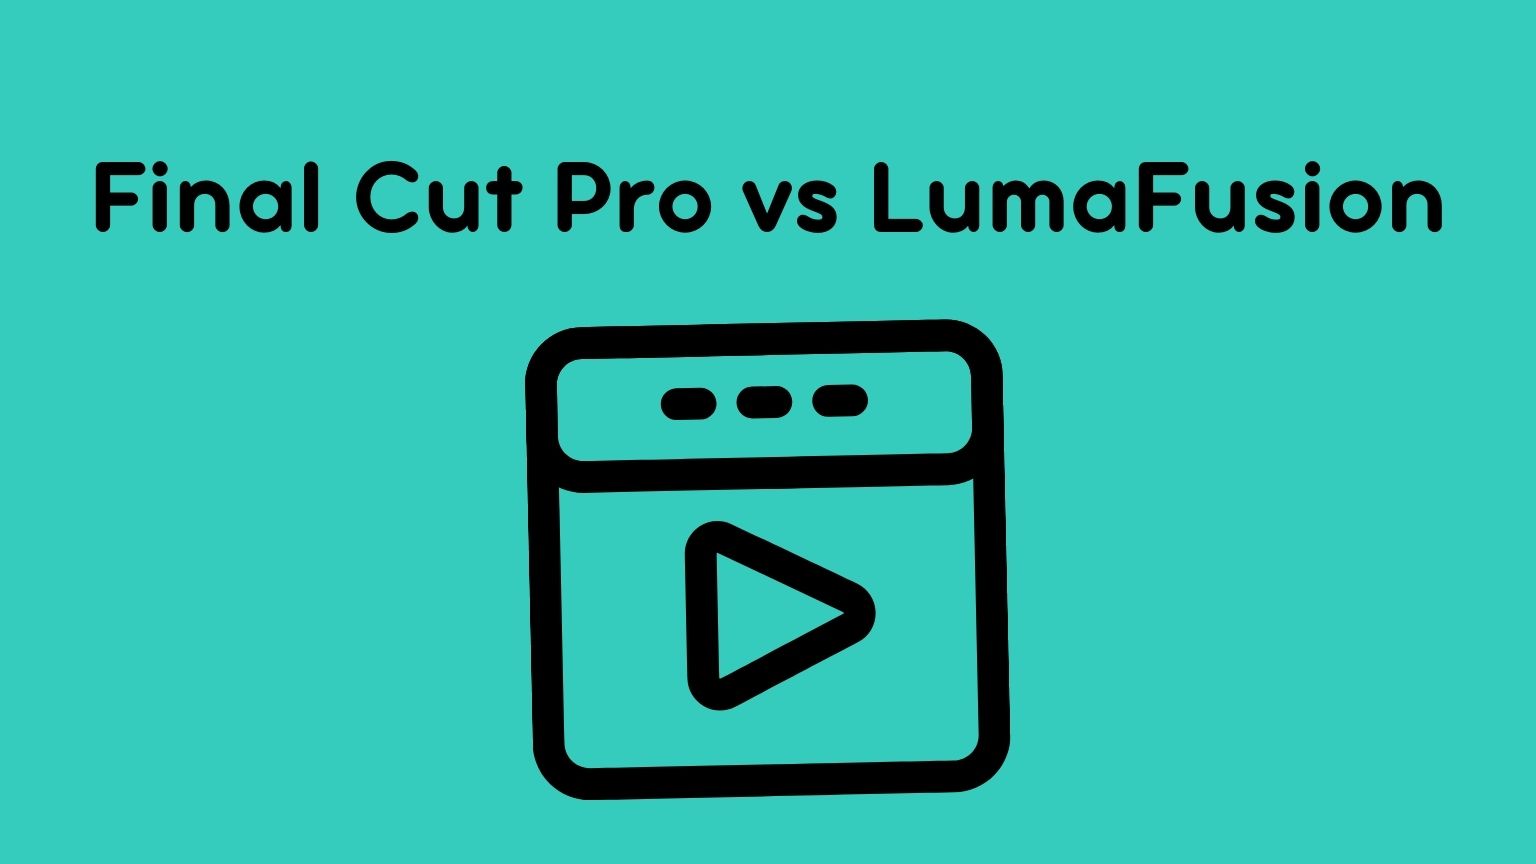 Final Cut Pro vs LumaFusion: Which One is Better for Video Editing